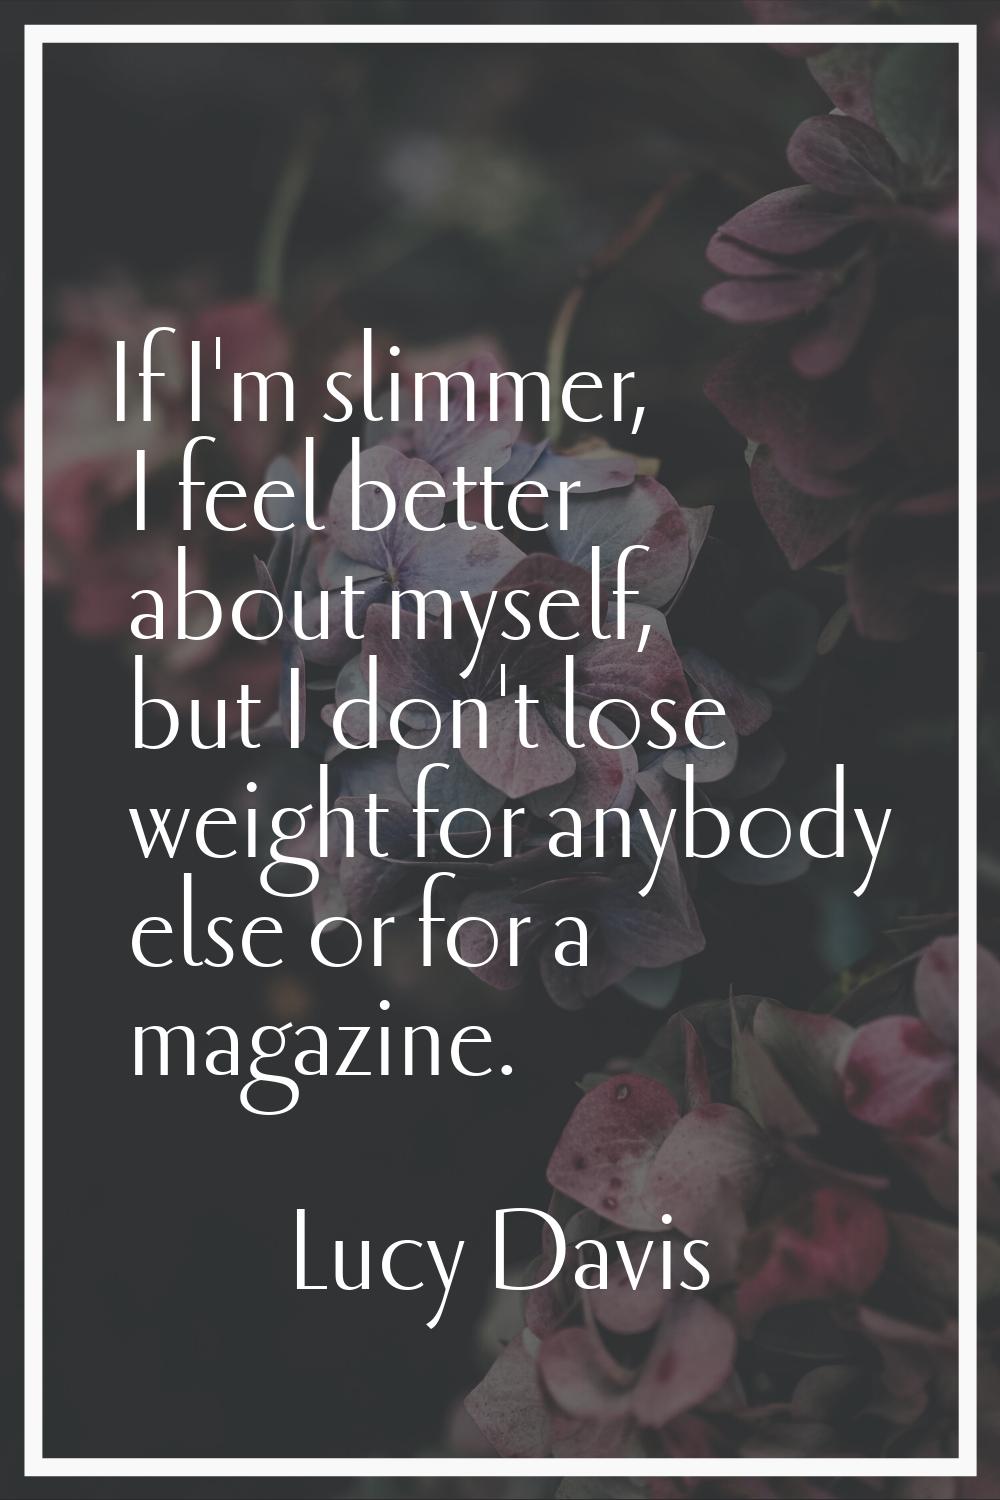 If I'm slimmer, I feel better about myself, but I don't lose weight for anybody else or for a magaz